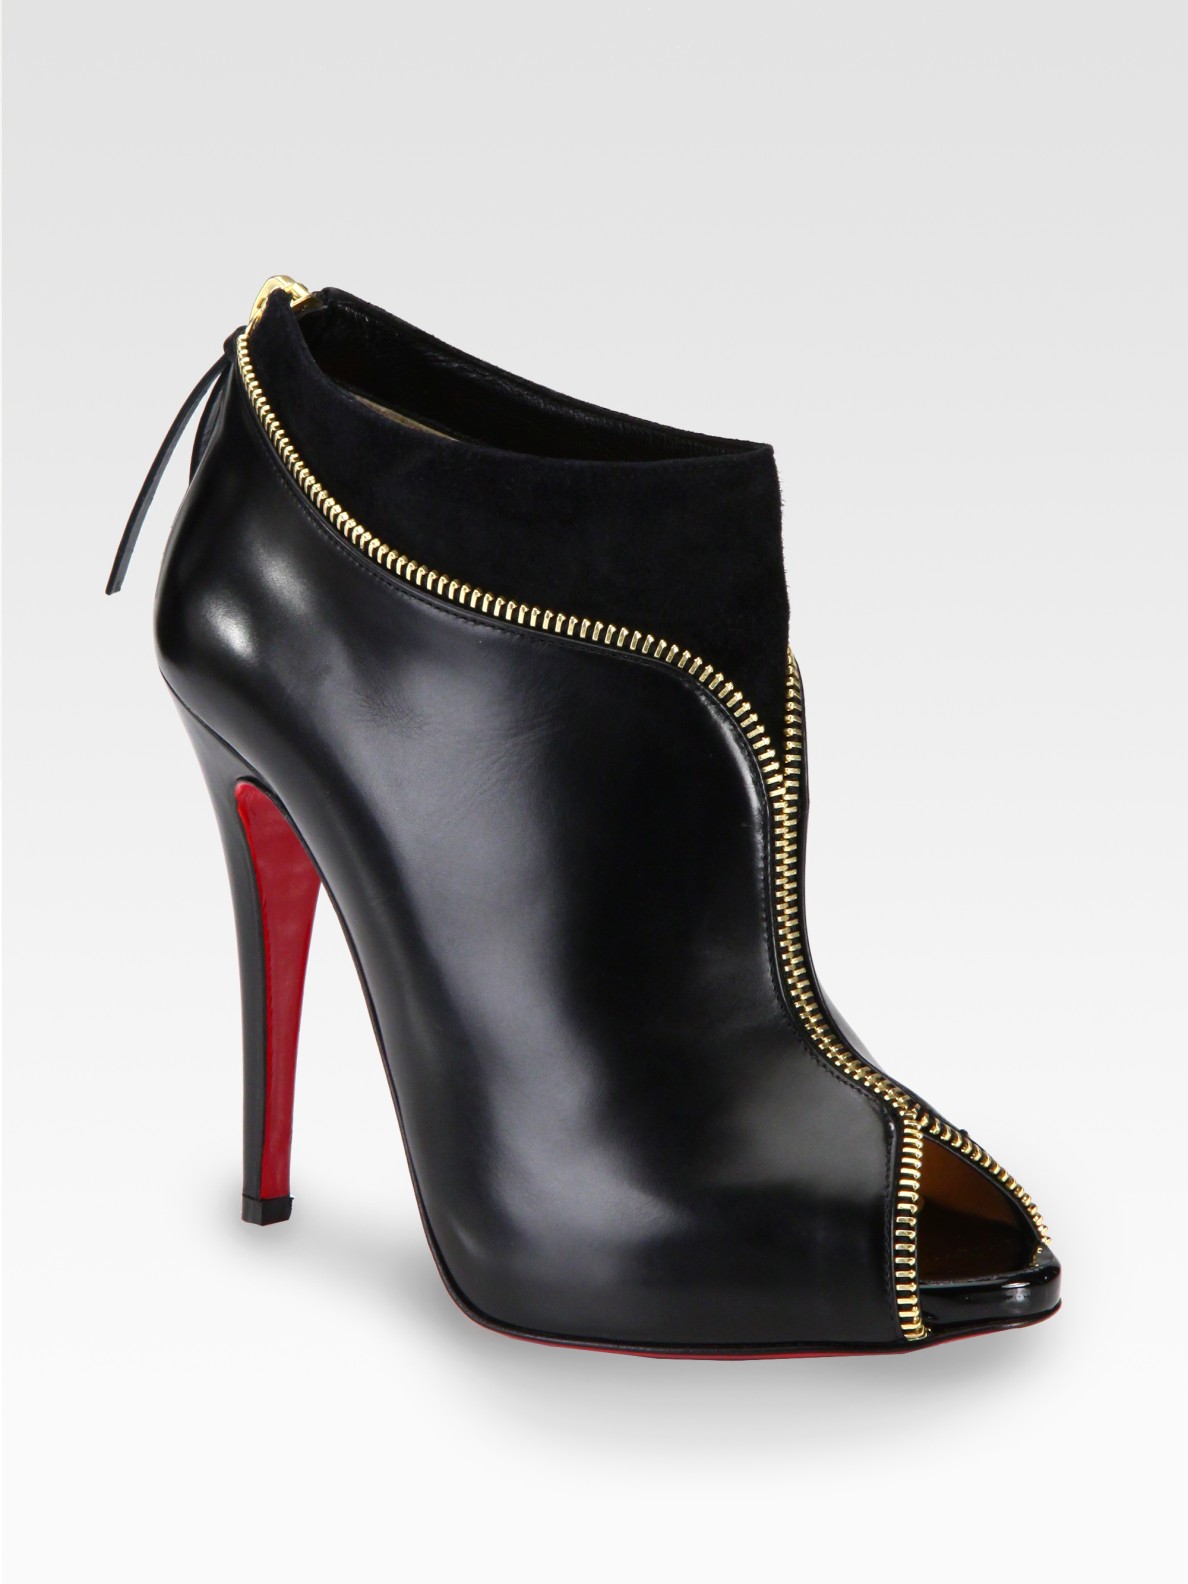 binding venskab ål Christian Louboutin Leather and Suede Zipper Ankle Boots in Black | Lyst